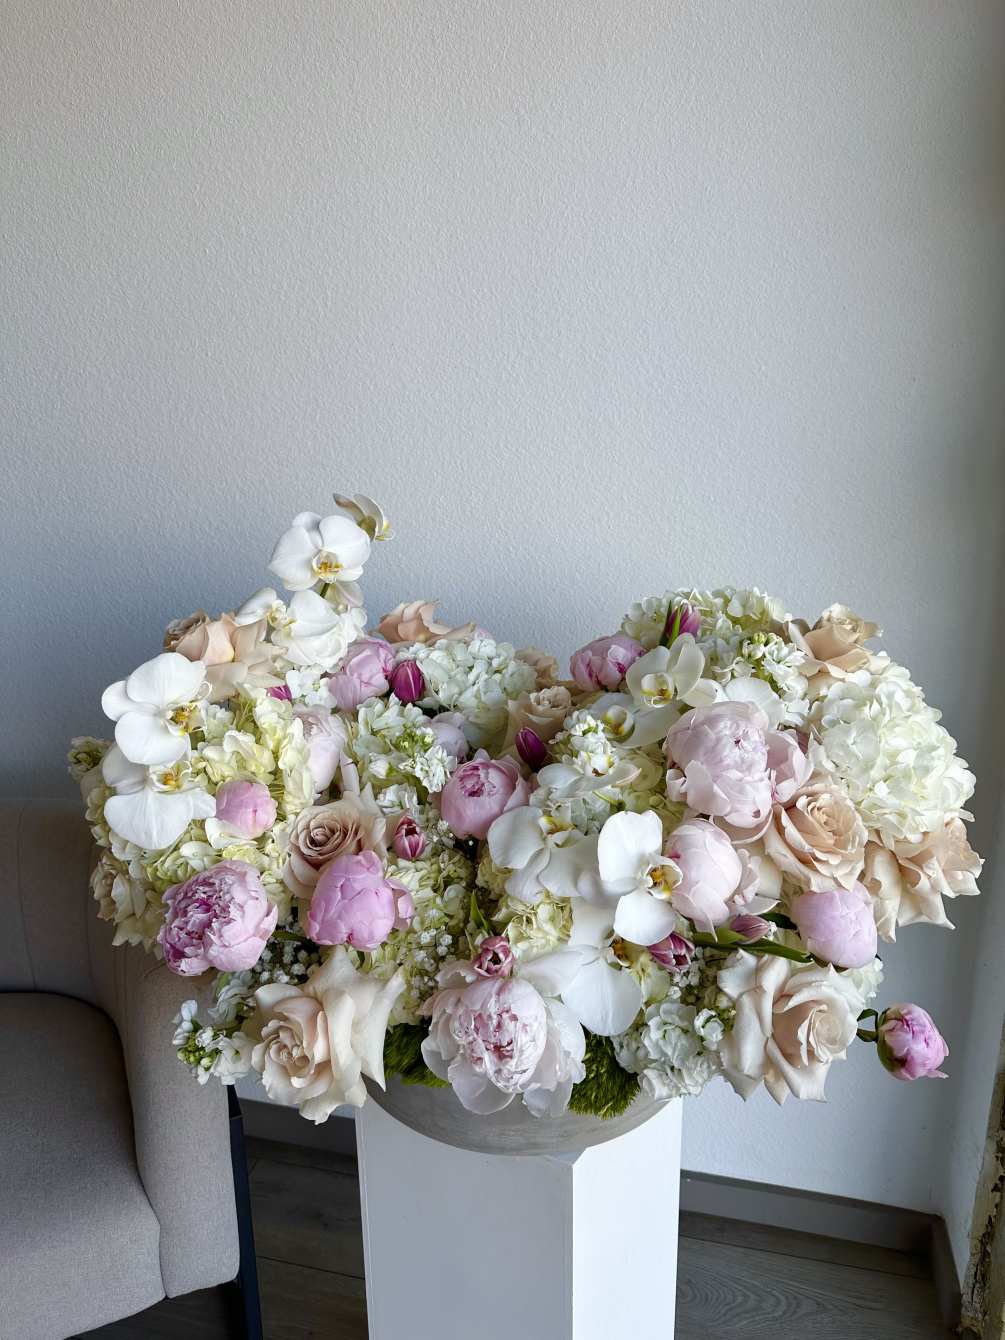 This Extra Large romantic arrangement includes roses, hydrangeas, peonies, orchids and greens.

Perfect